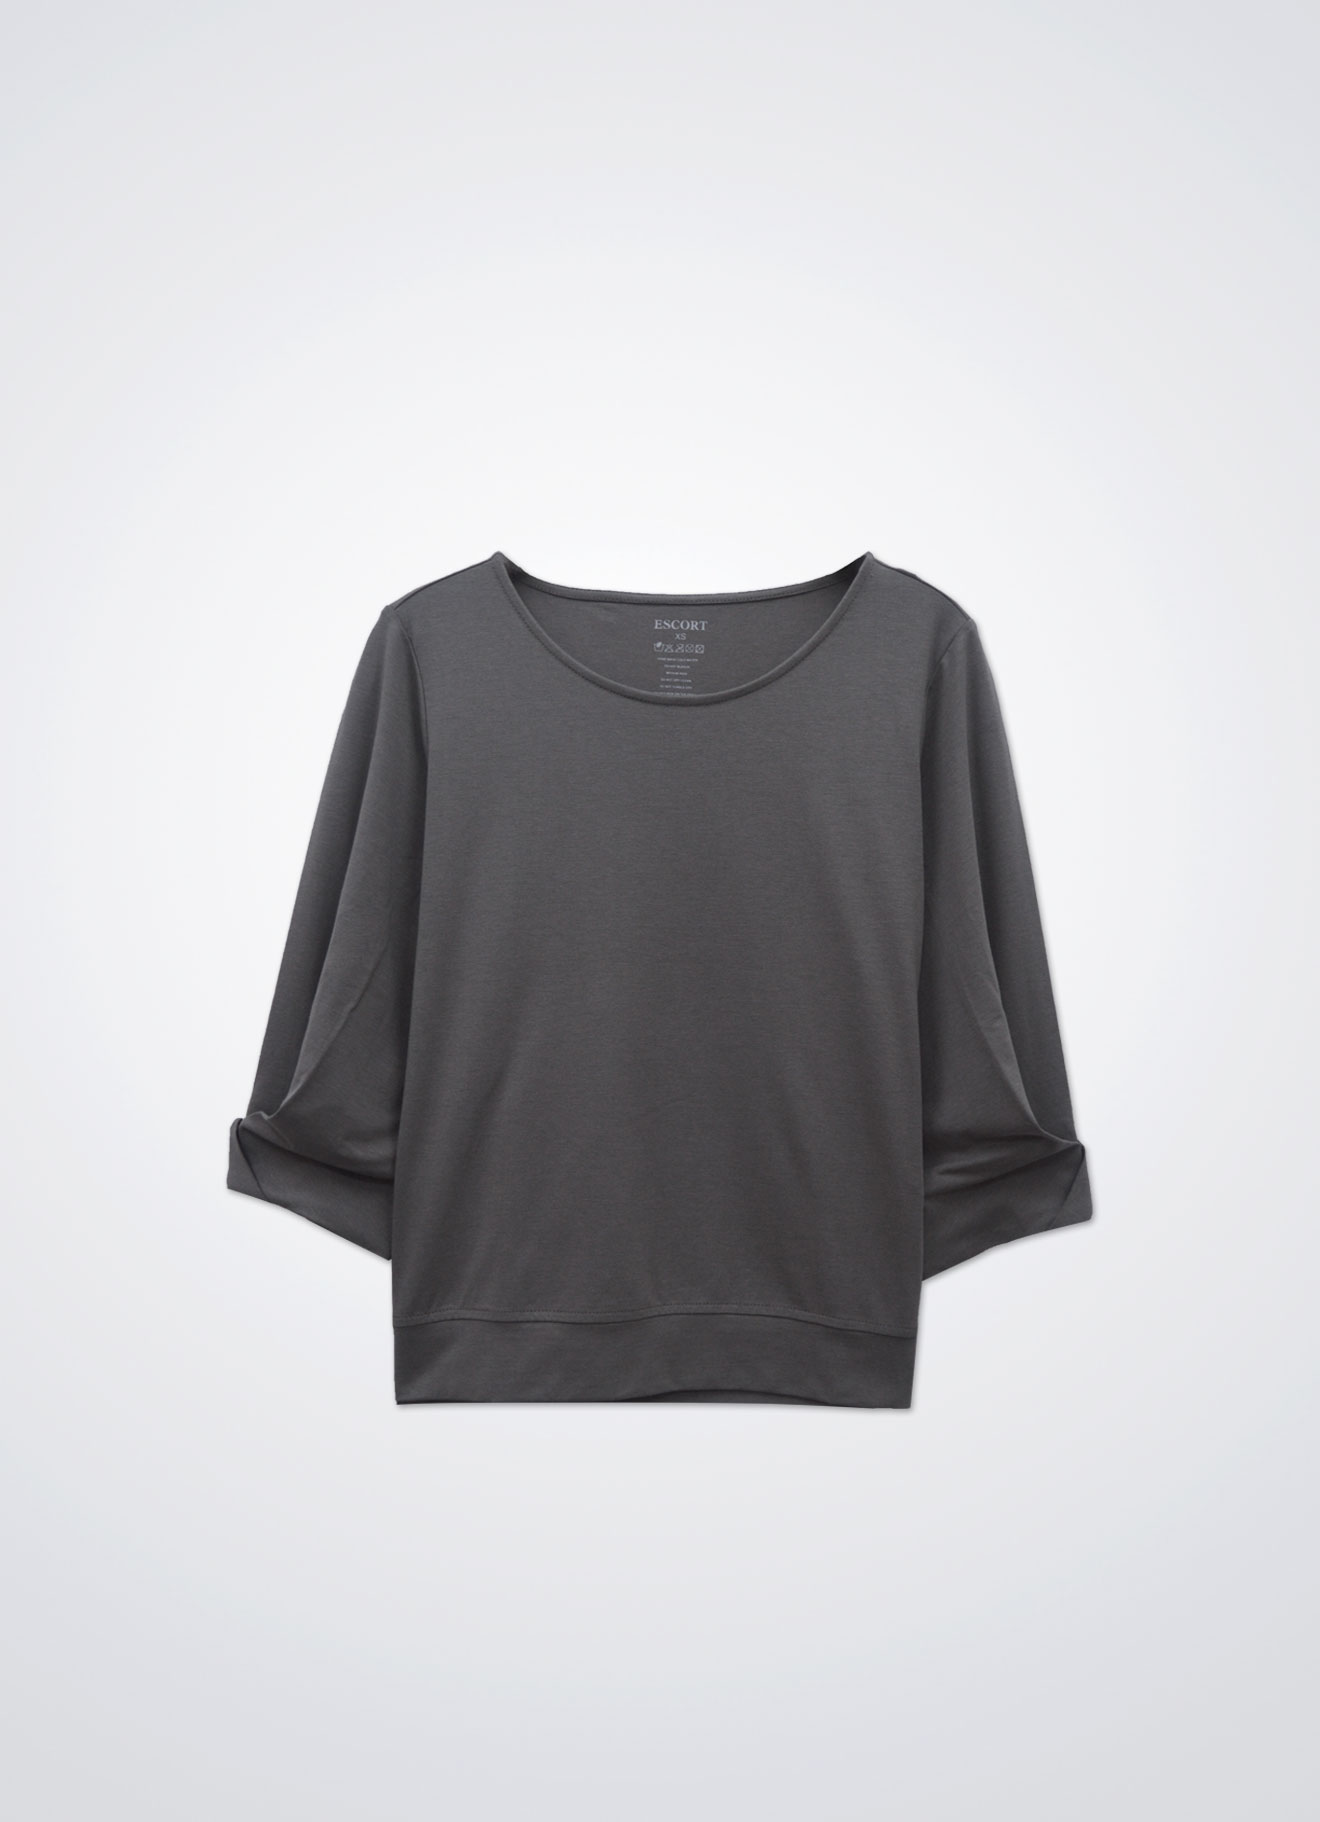 Bungee-Cord by Sleeve Top